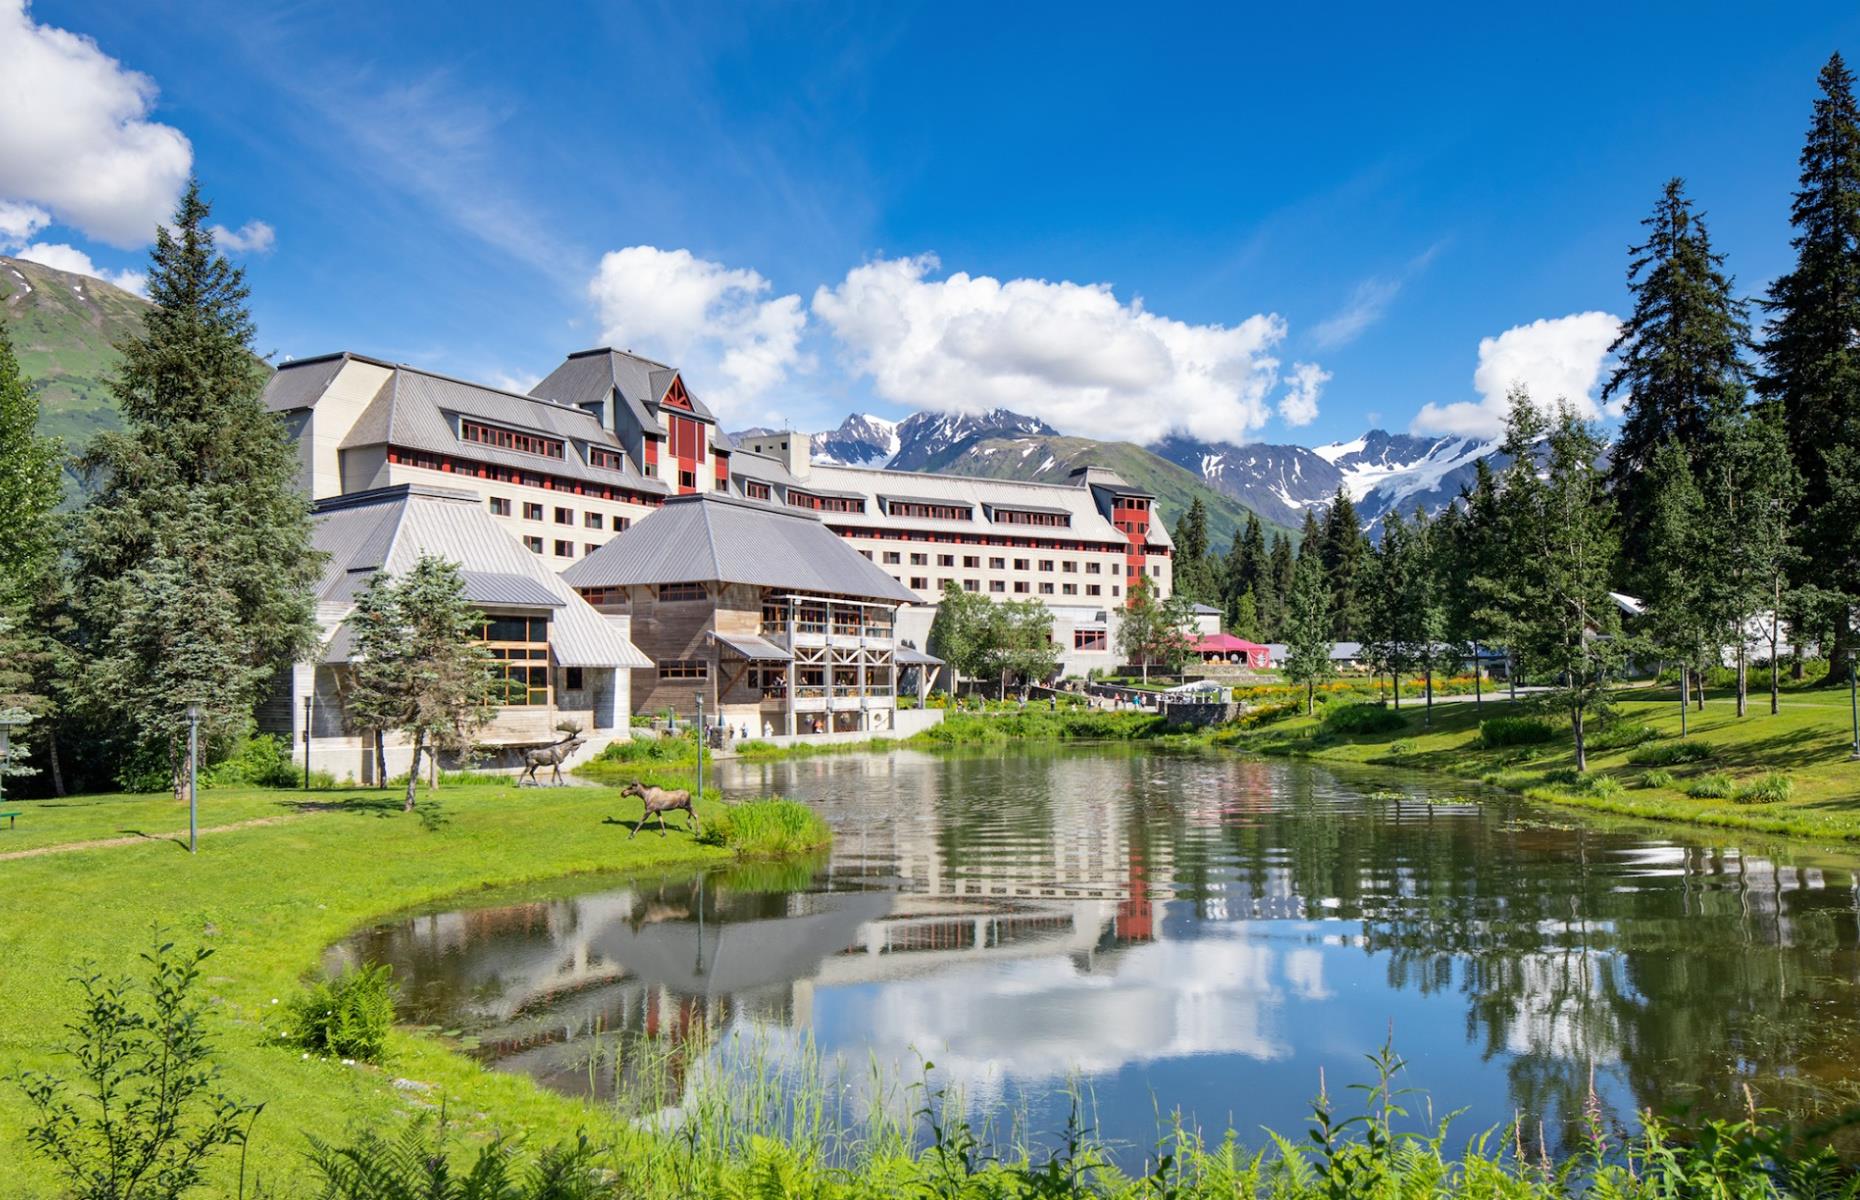 <p>This <a href="https://alyeskaresort.com/">chateau-style hotel</a> stands at the base of the Chugach Mountains, a top Alaskan ski area that doubles as a great hiking destination in the summertime. Suitable for family trips, the comfy accommodations at the Alyeska include a number of larger suites, all decorated with striking indigenous Alaskan artwork. Spa services, a yoga studio and fine dining are all available, so you'll get the full resort experience. </p>